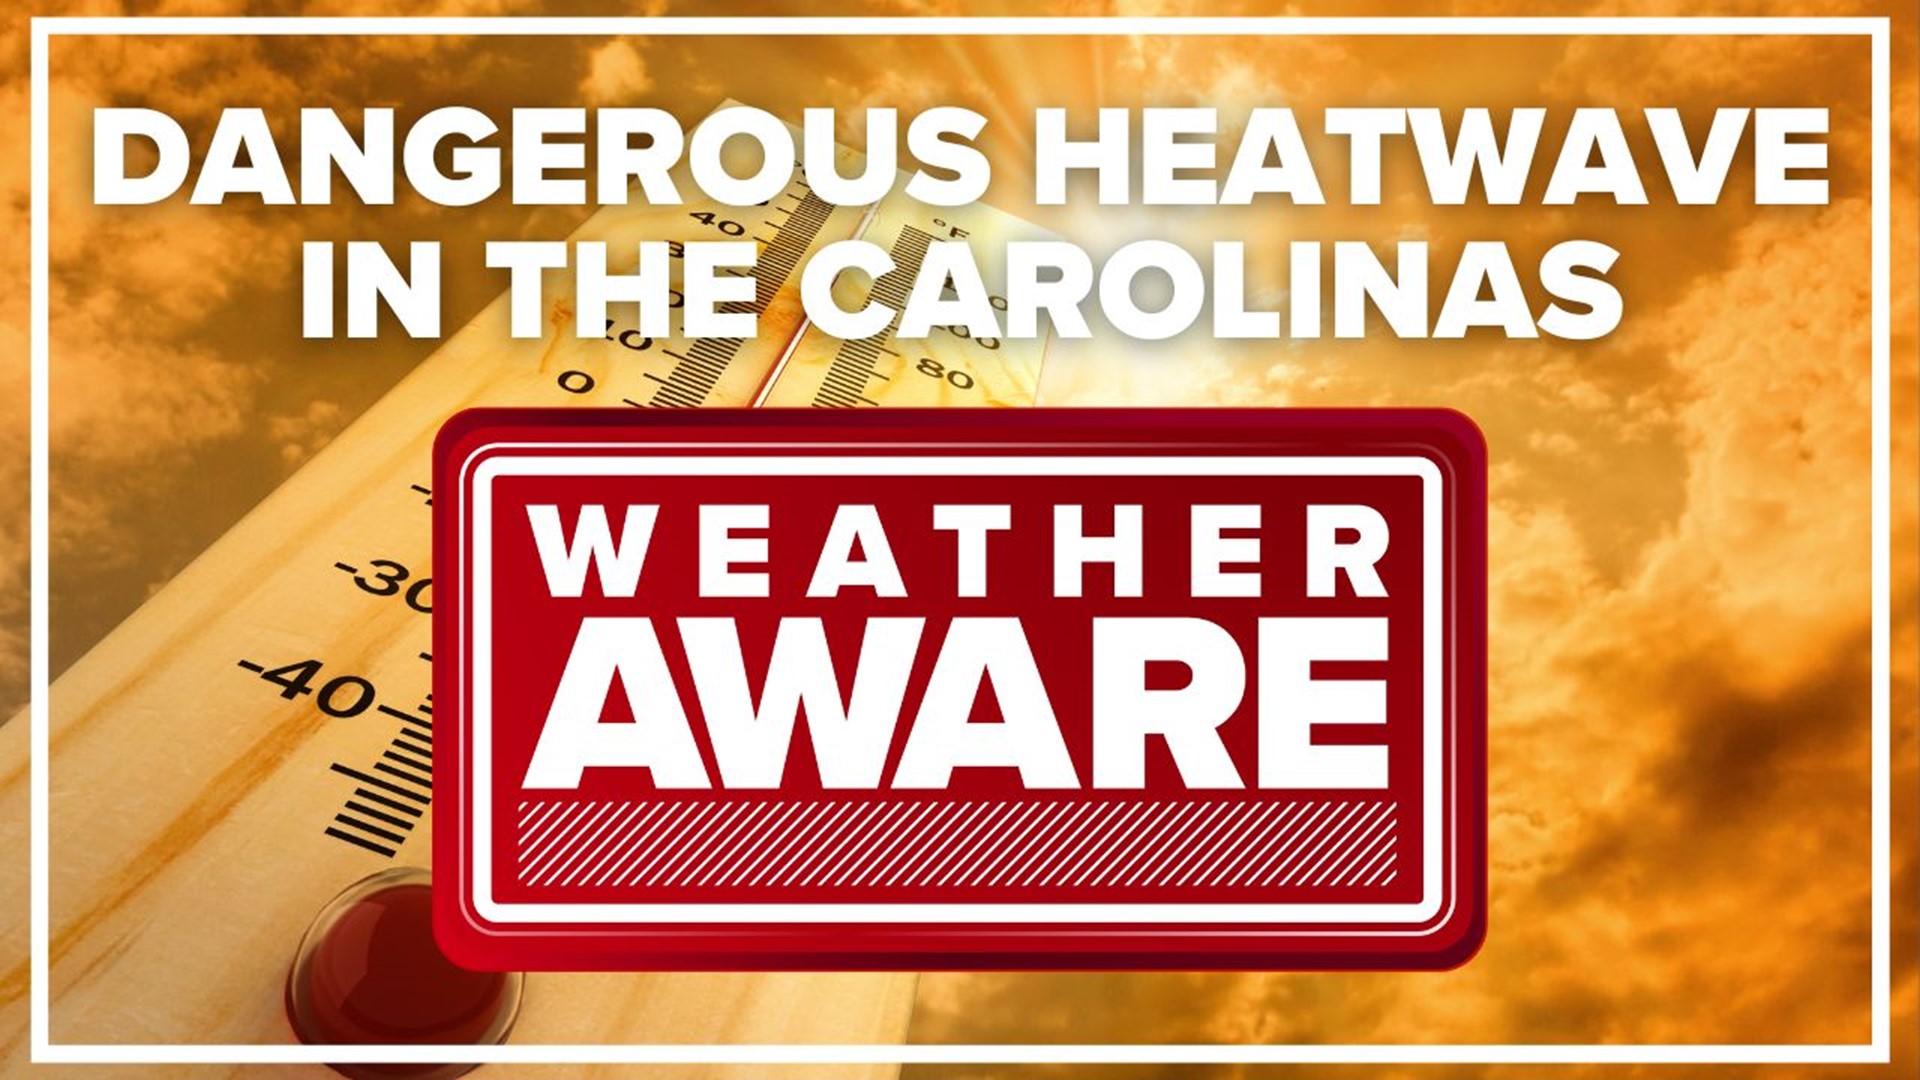 The Carolinas will be pushing 100 degrees all week and it's going to feel even hotter in the Charlotte area. Here's the latest from Larry Sprinkle & Chris Mulcahy.